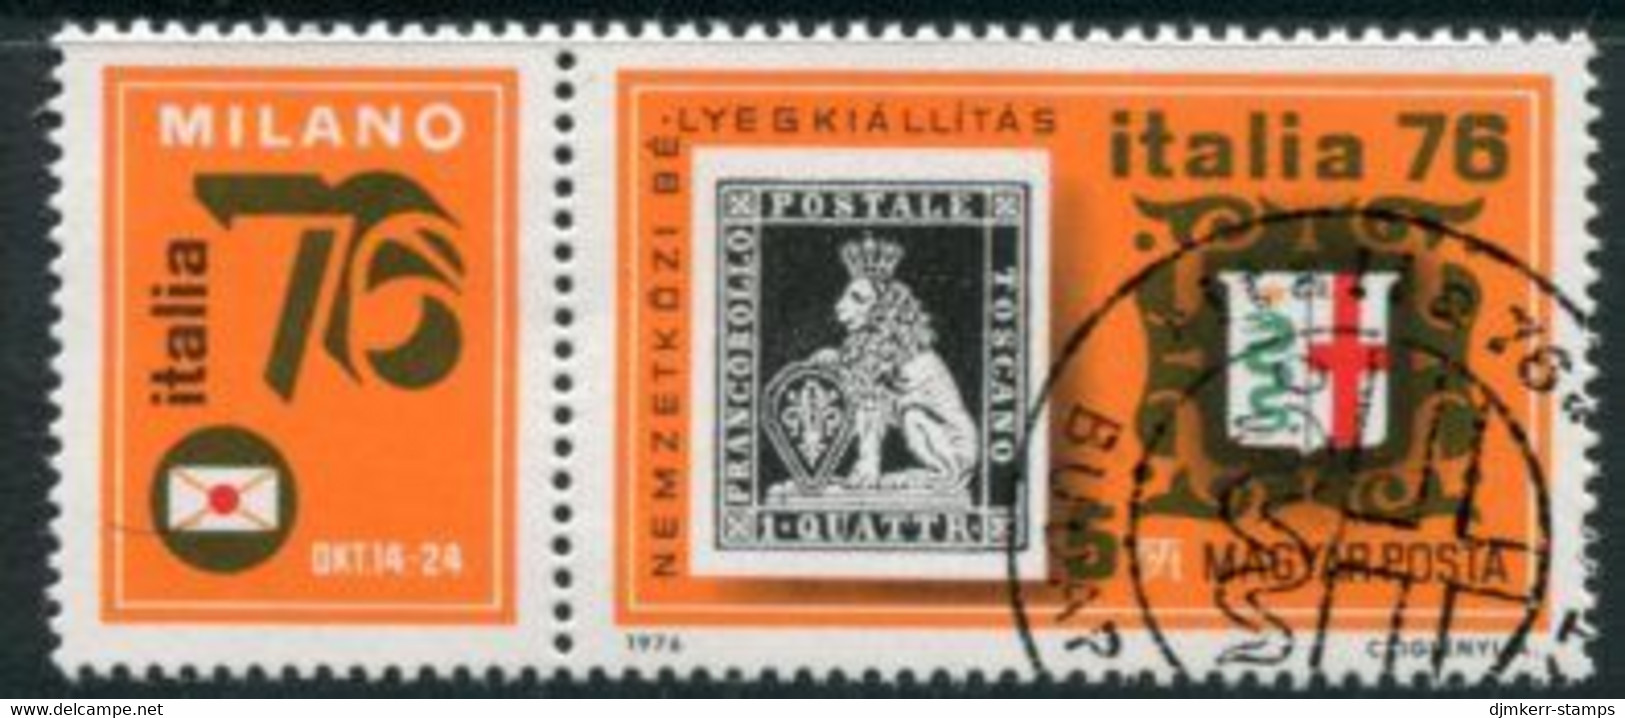 HUNGARY 1976 ITALIA Stamp Exhibition  Used.  Michel 3143 - Used Stamps